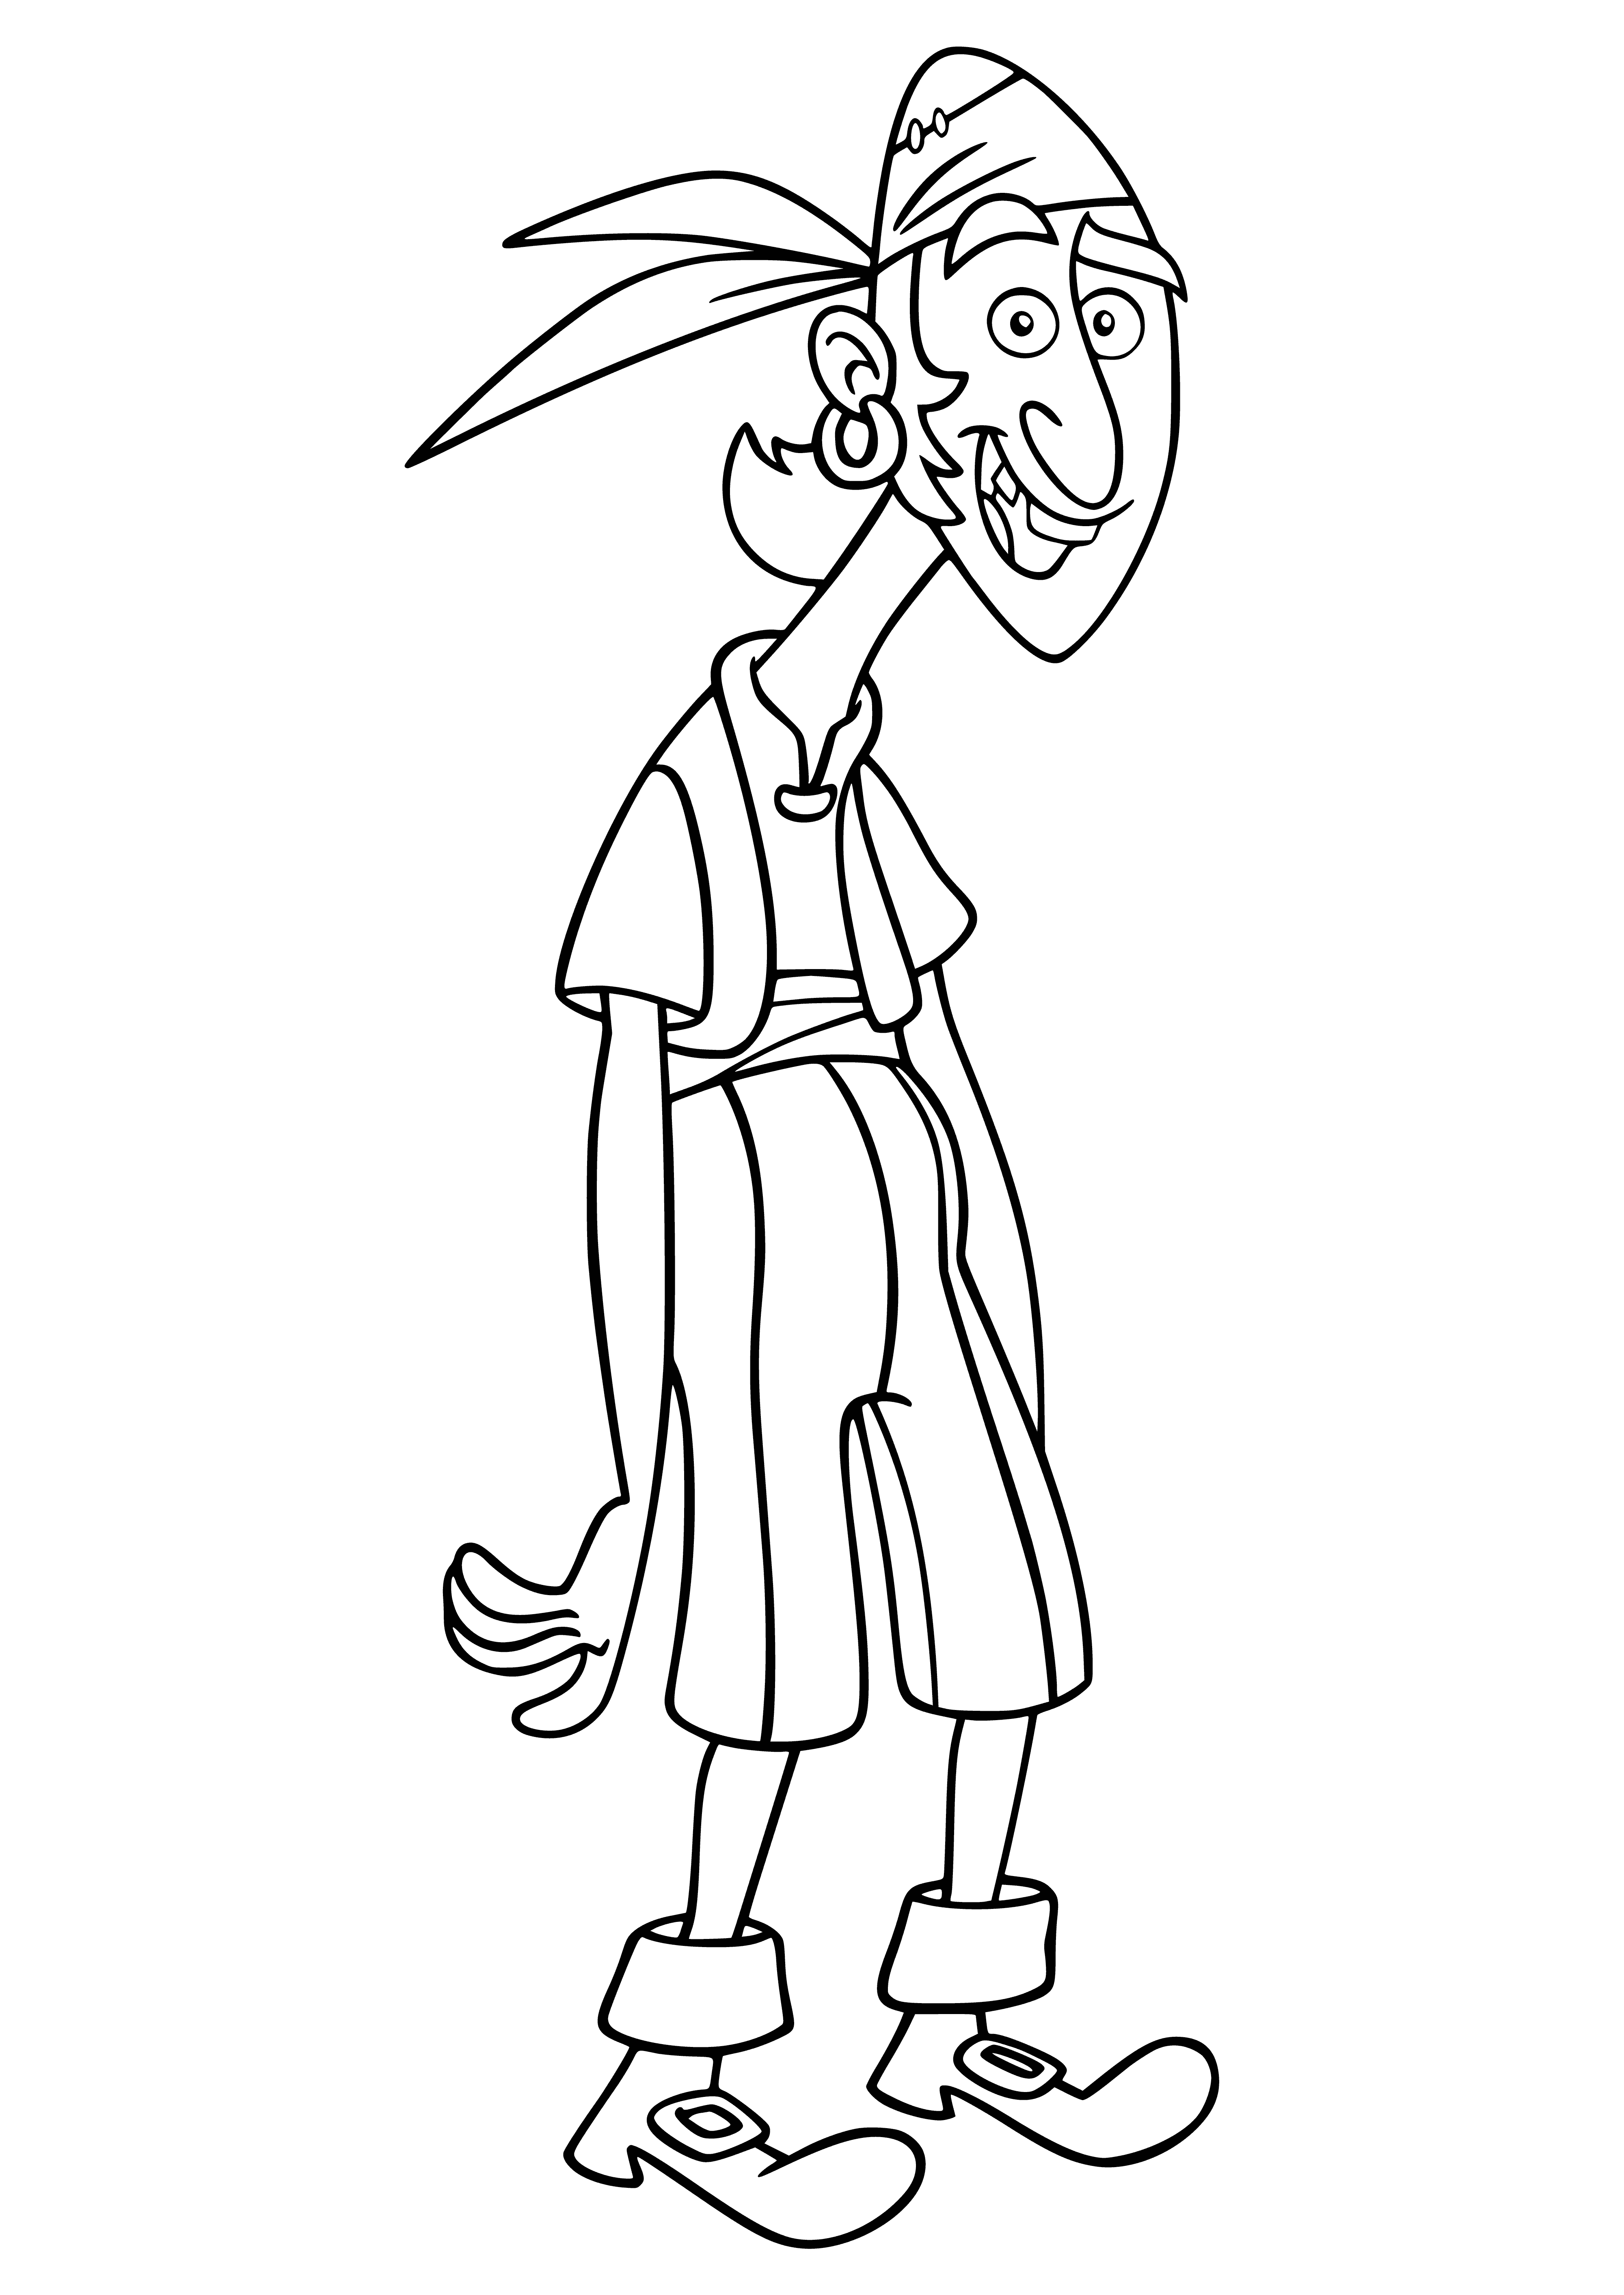 Pirate Bons coloriage